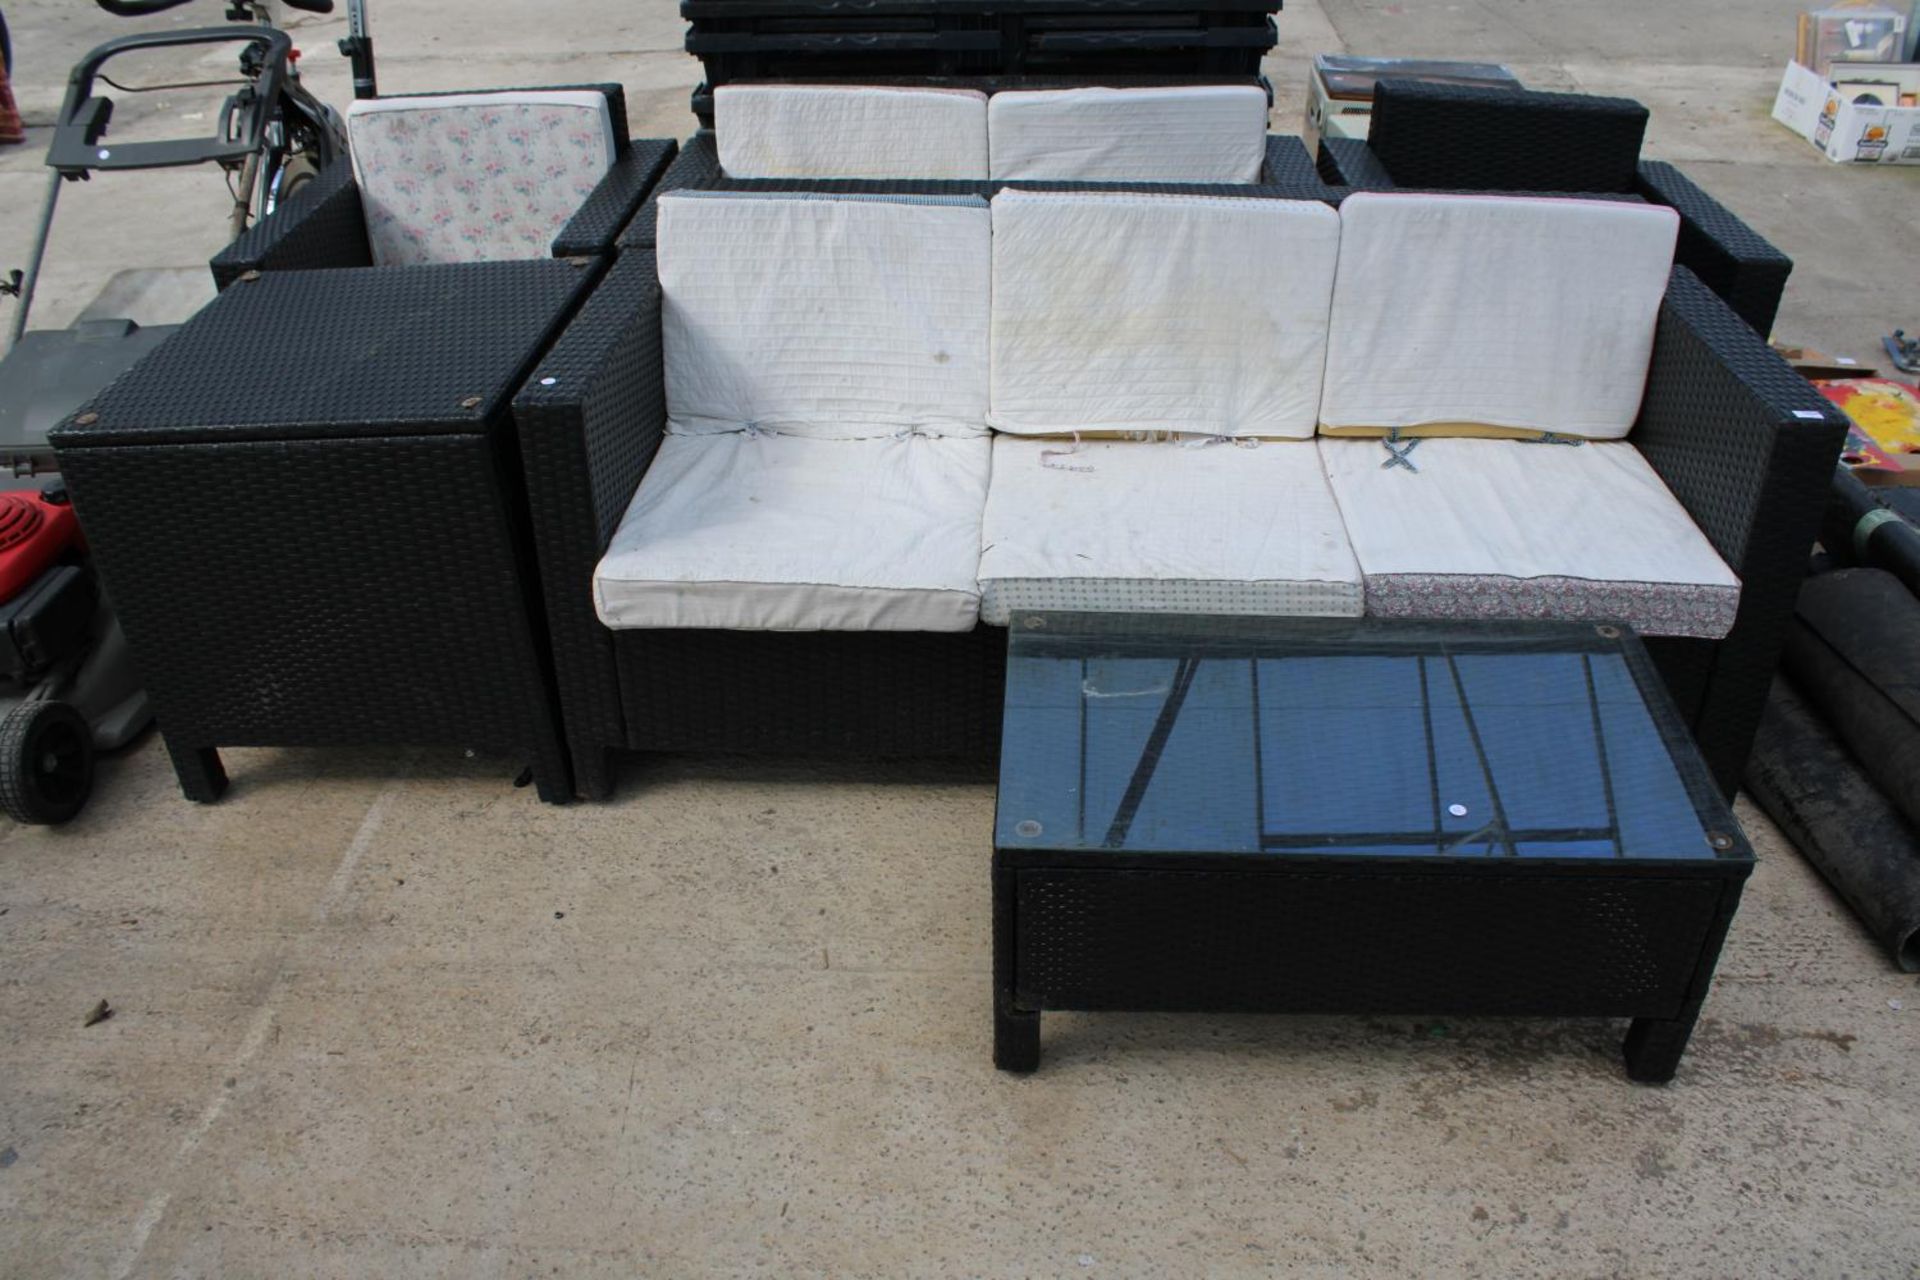 A SIX PIECE RATTAN GARDEN FURNITURE SET COMPRISING OF A THREE SEATER, A TWO SEATER, TWO CHAIRS, A